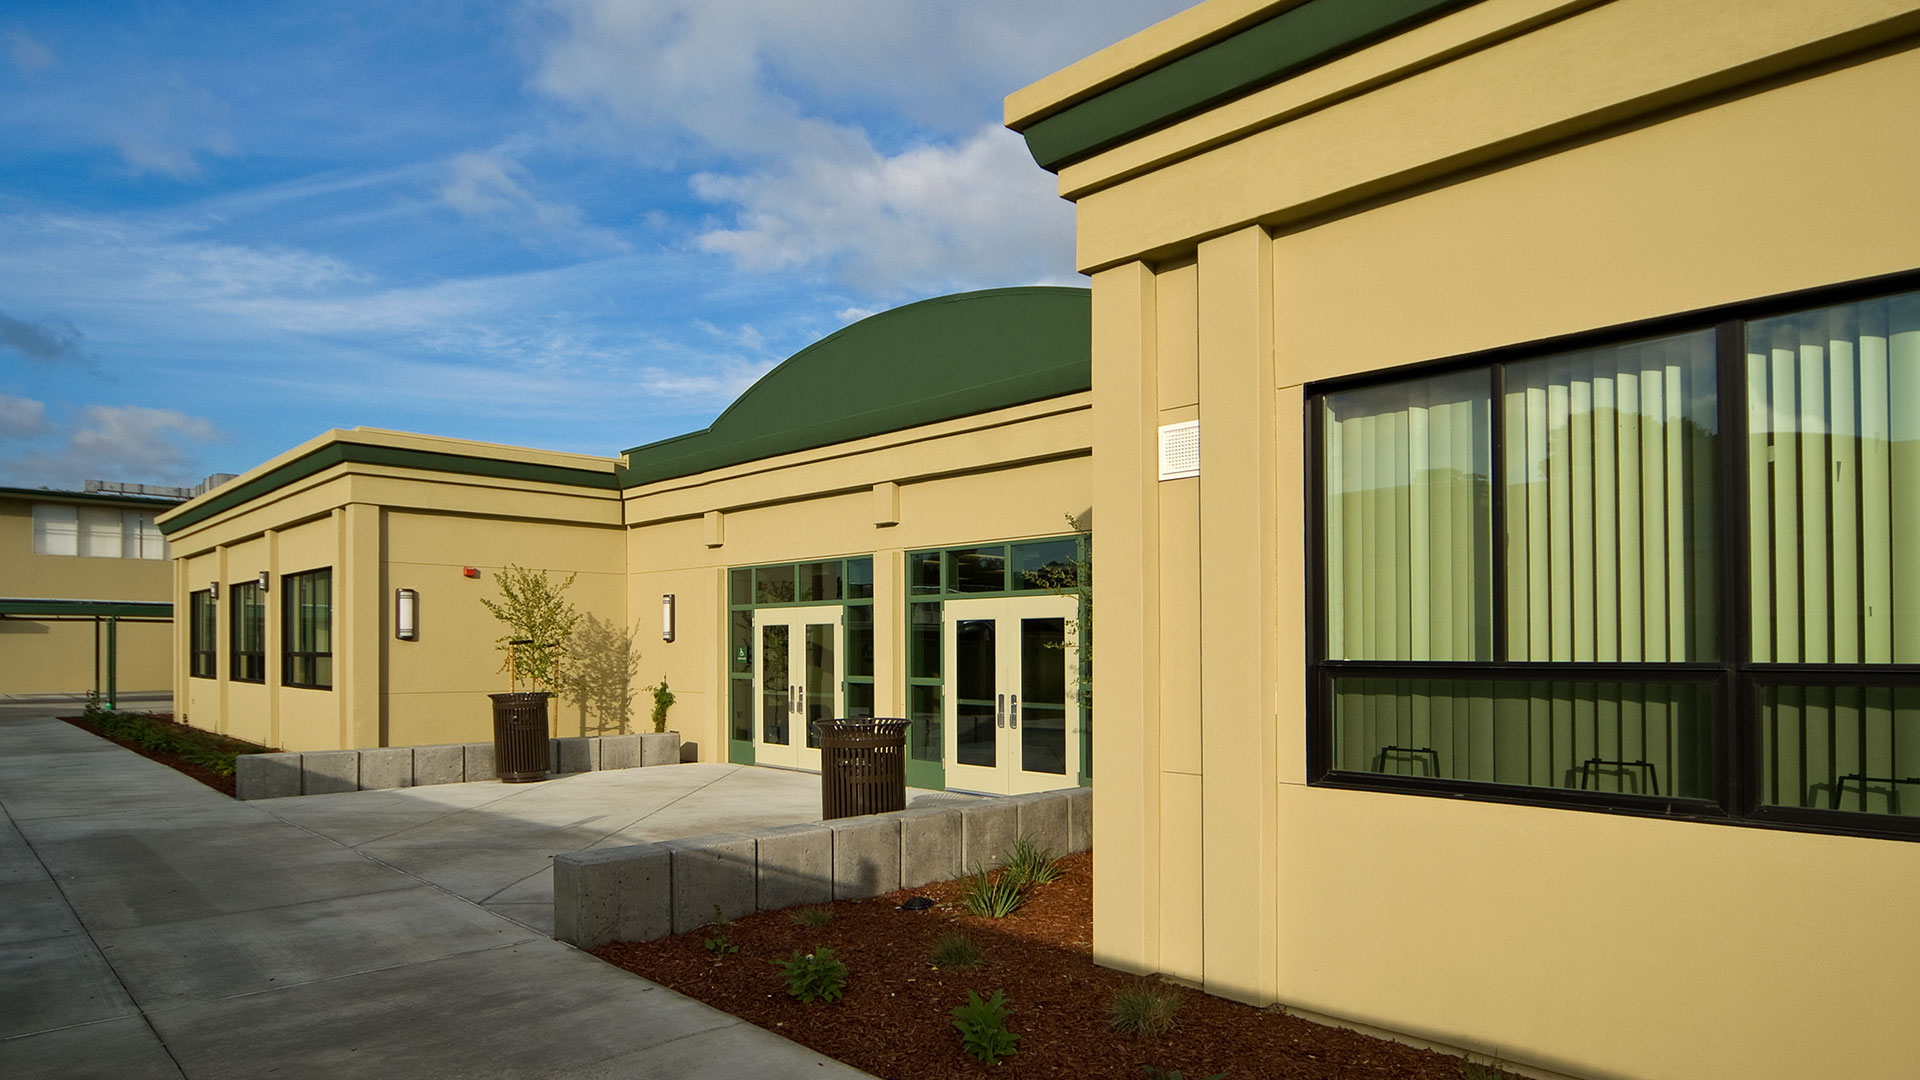 One story modular classroom wing with beige walls and green details, and green area flanking entrance..